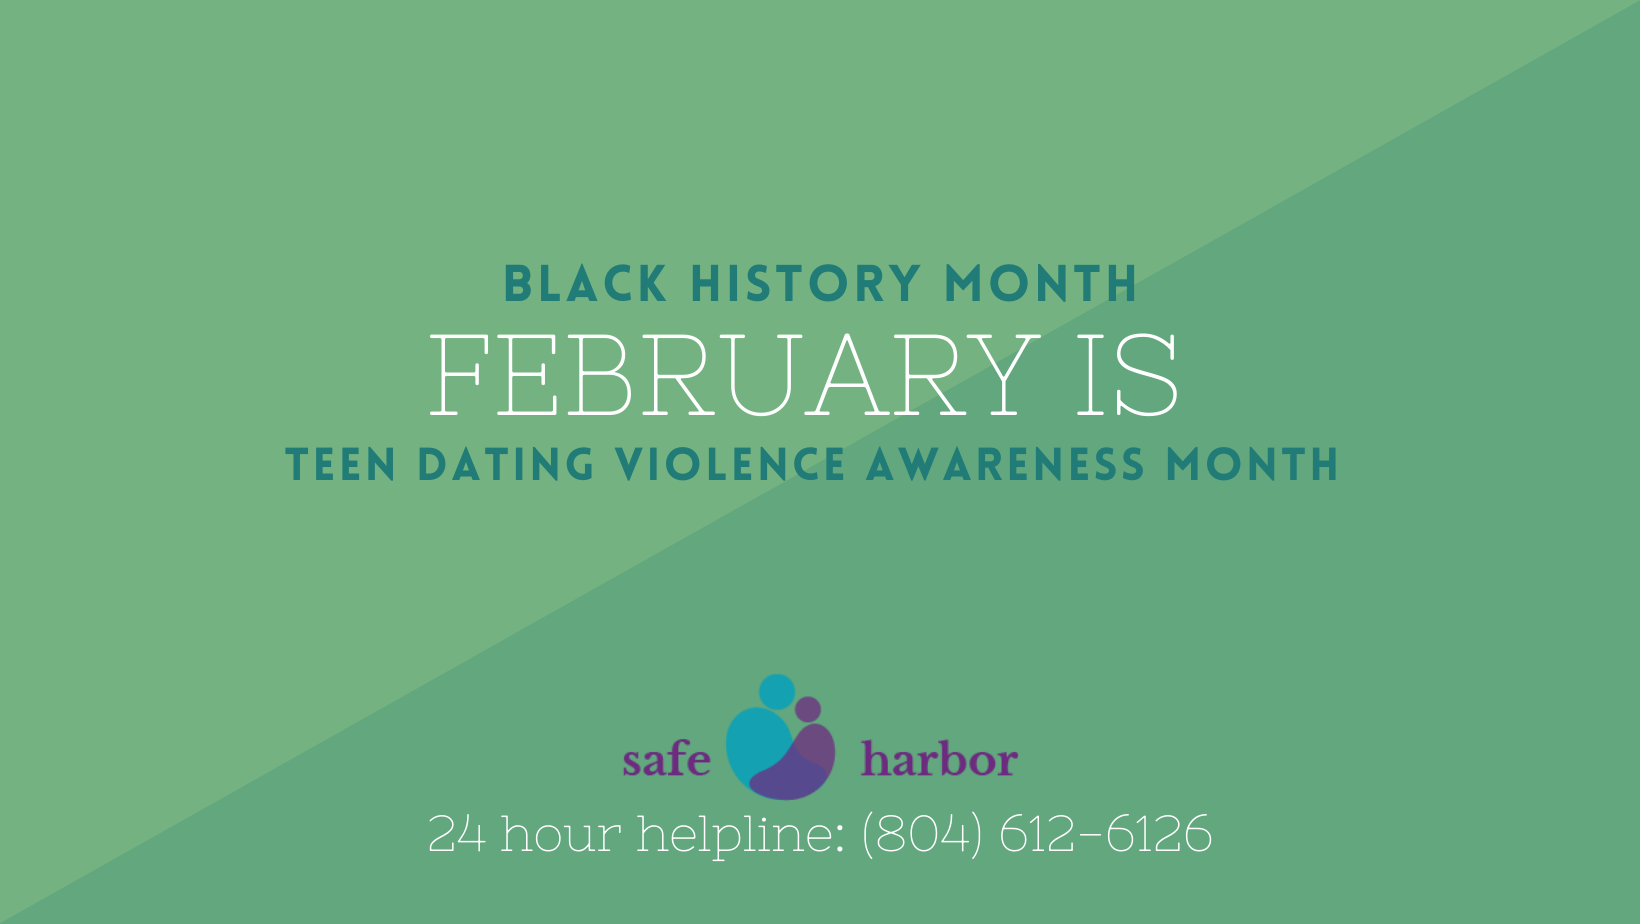 Teen Dating Violence Awareness Monthly Logo - For Help call the 24 hour helpline - 804.612.6126